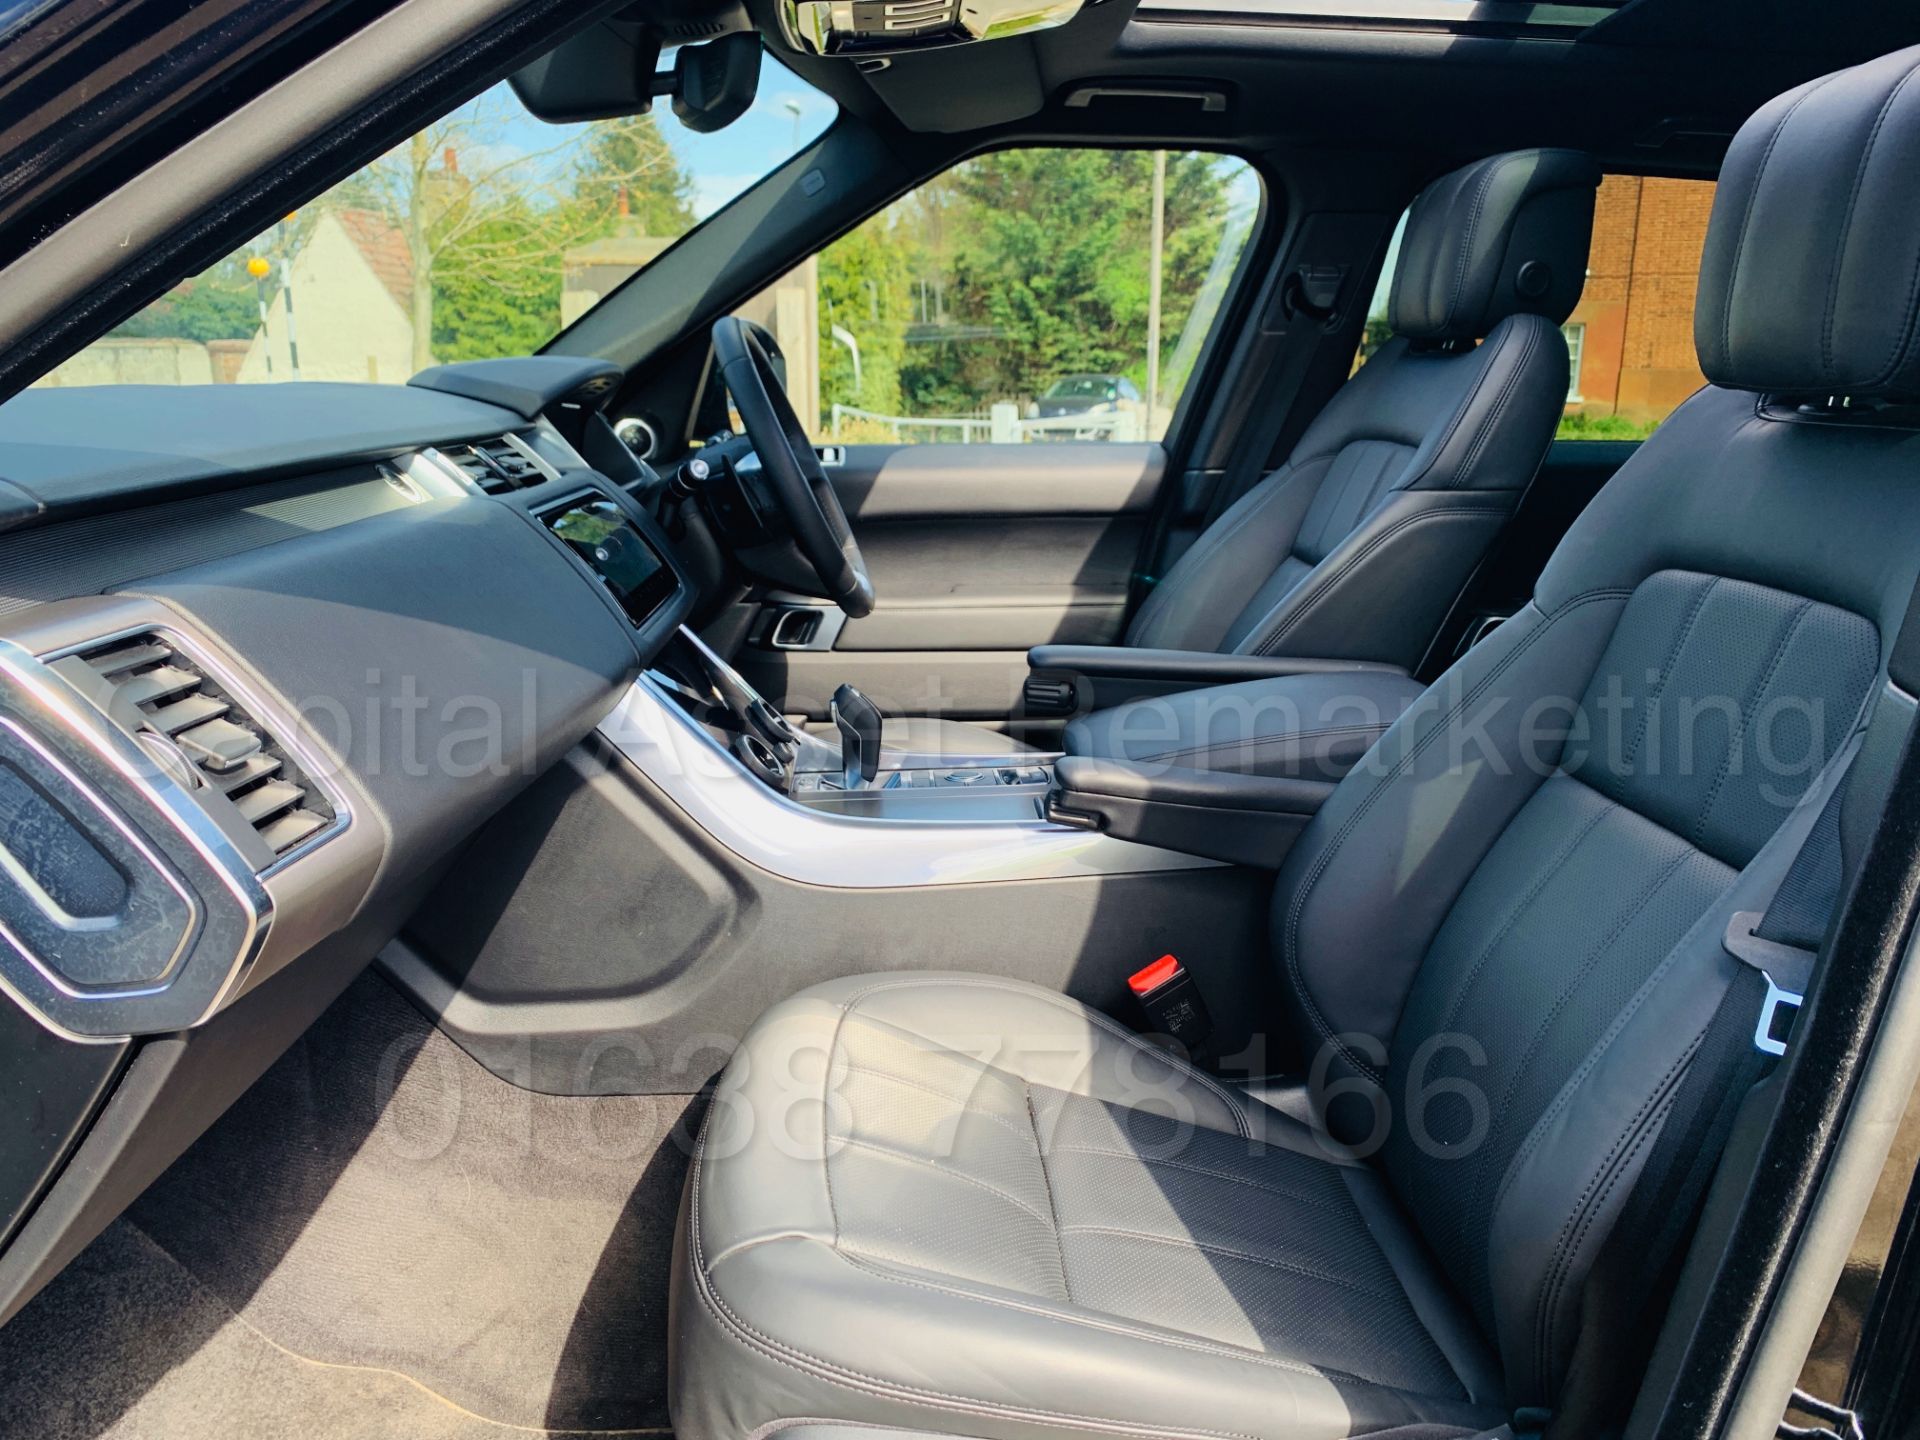 (ON SALE) RANGE ROVER SPORT *HSE* (2019 - ALL NEW MODEL) '3.0 SDV6 - 306 BHP - 8 SPEED AUTO' - Image 25 of 73